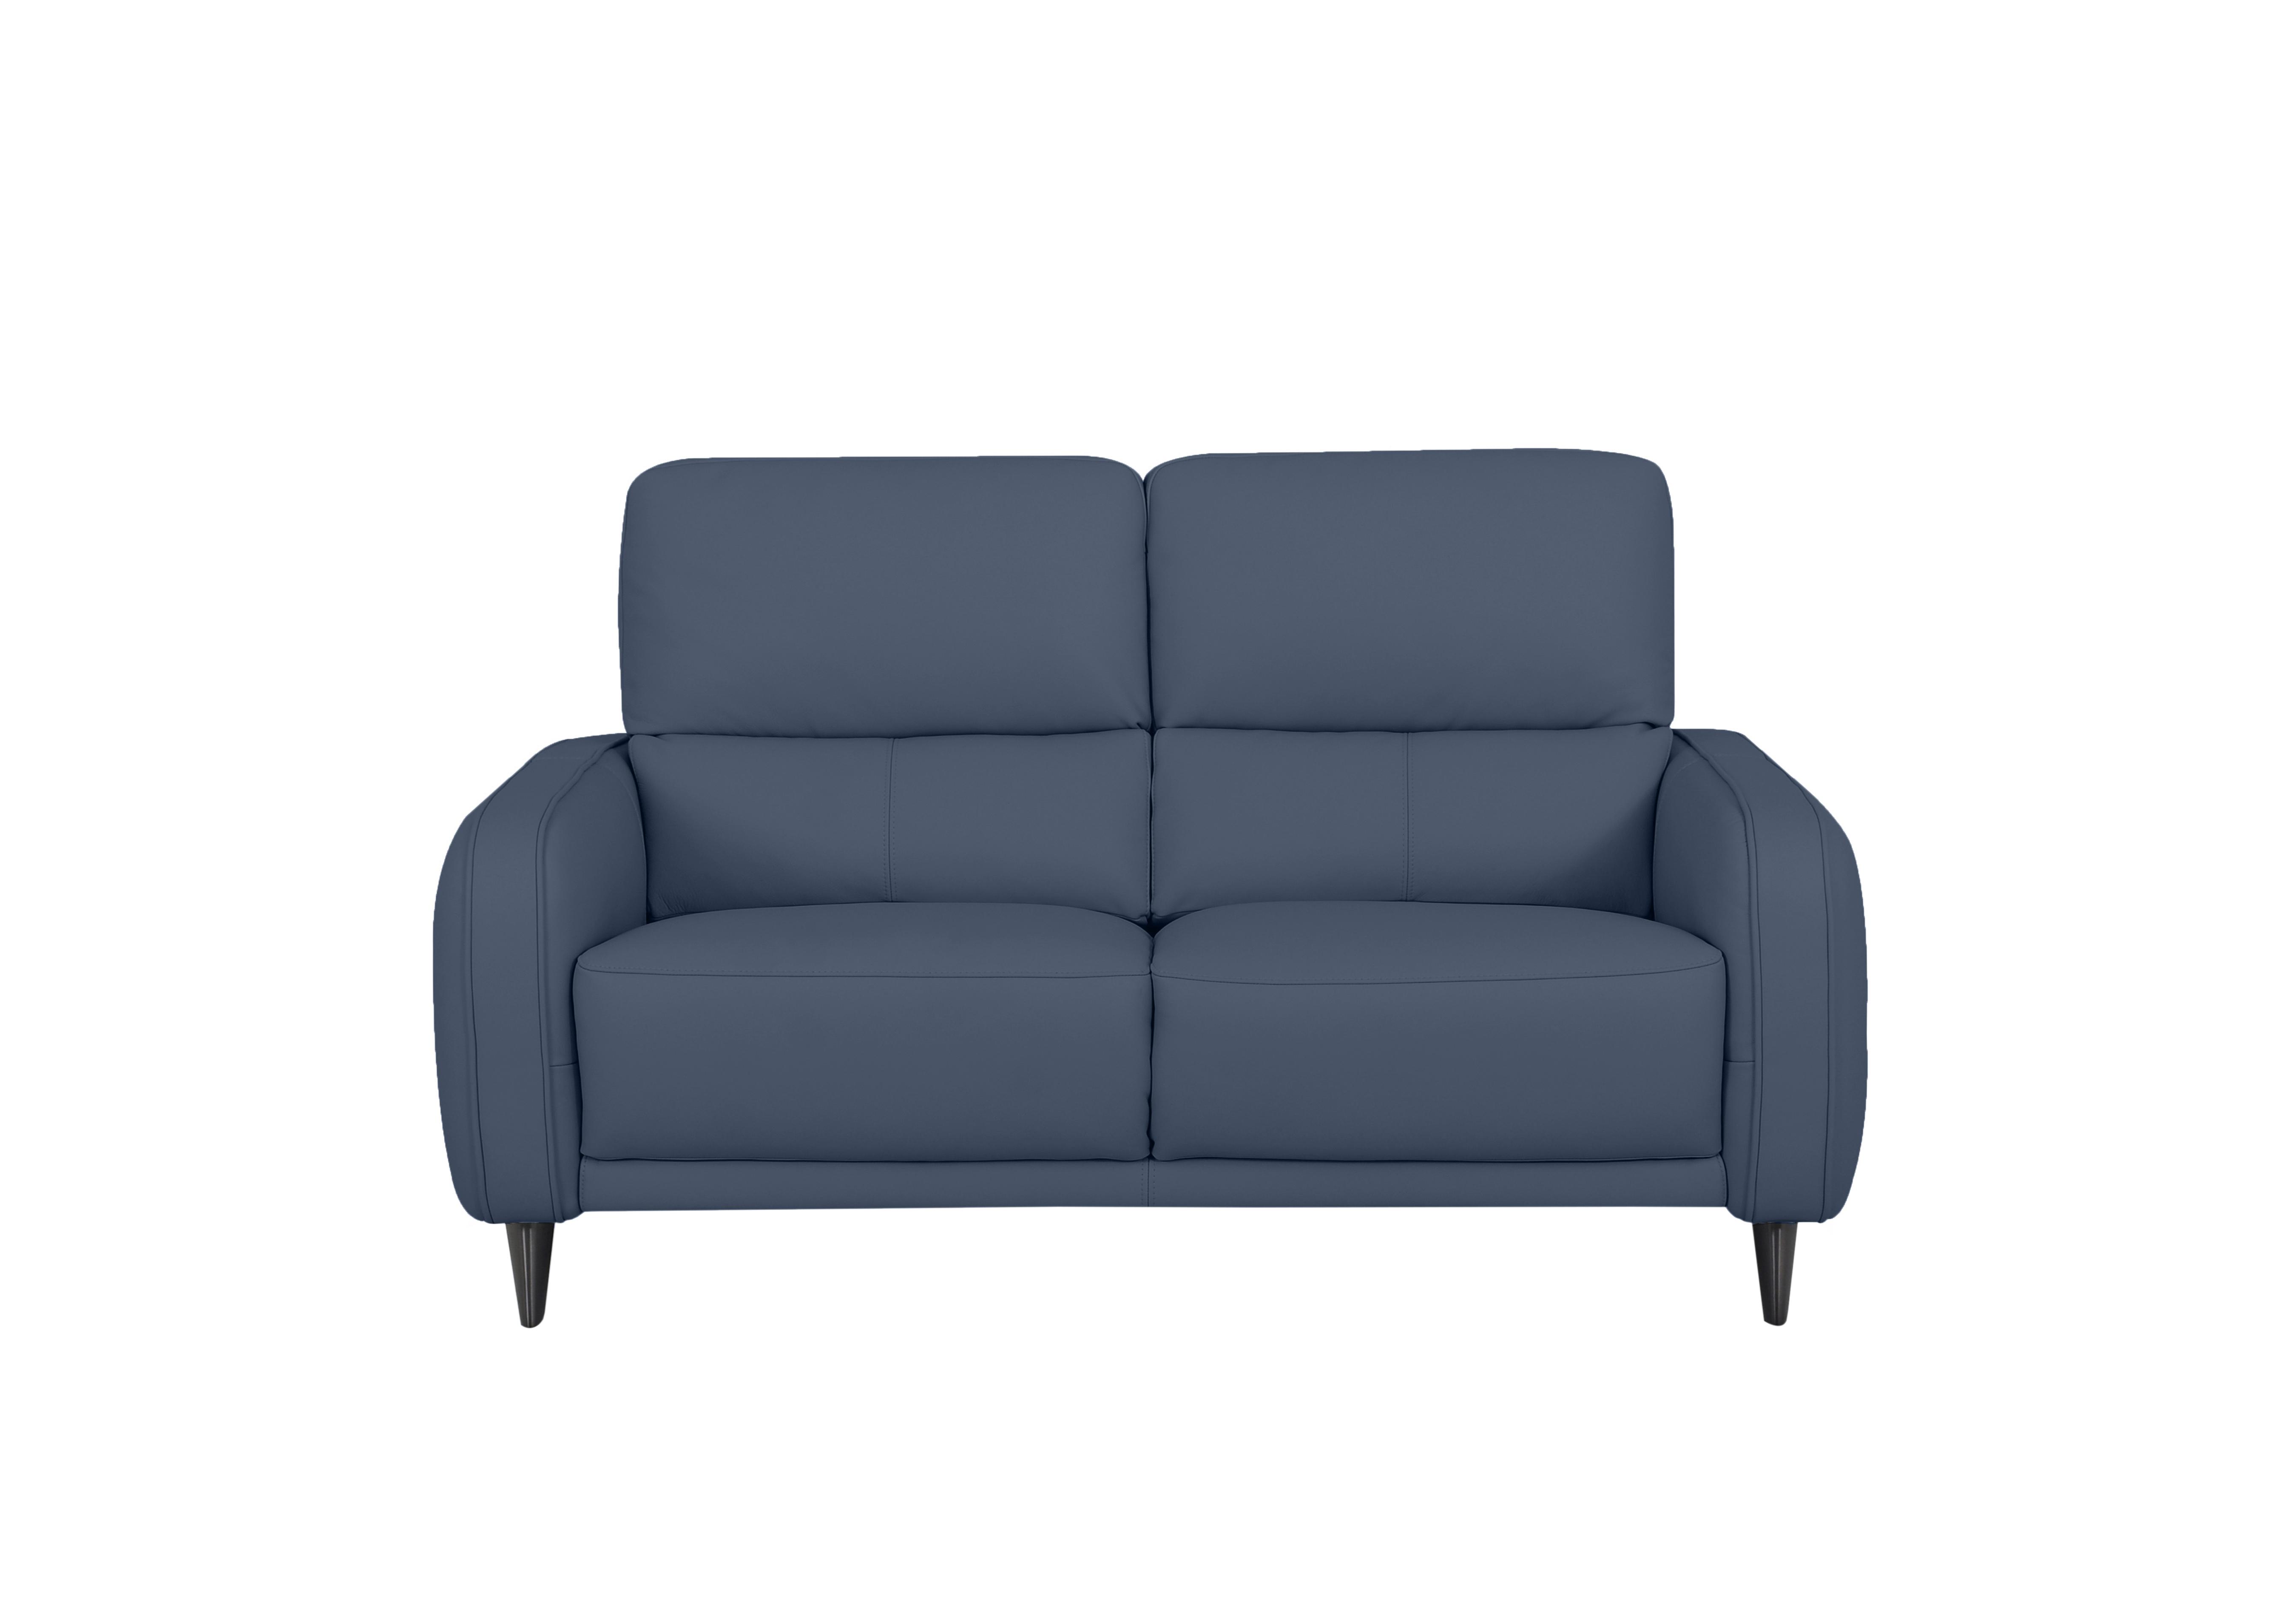 Logan 2.5 Seater Leather Sofa in Np-518e Ocean Blue on Furniture Village